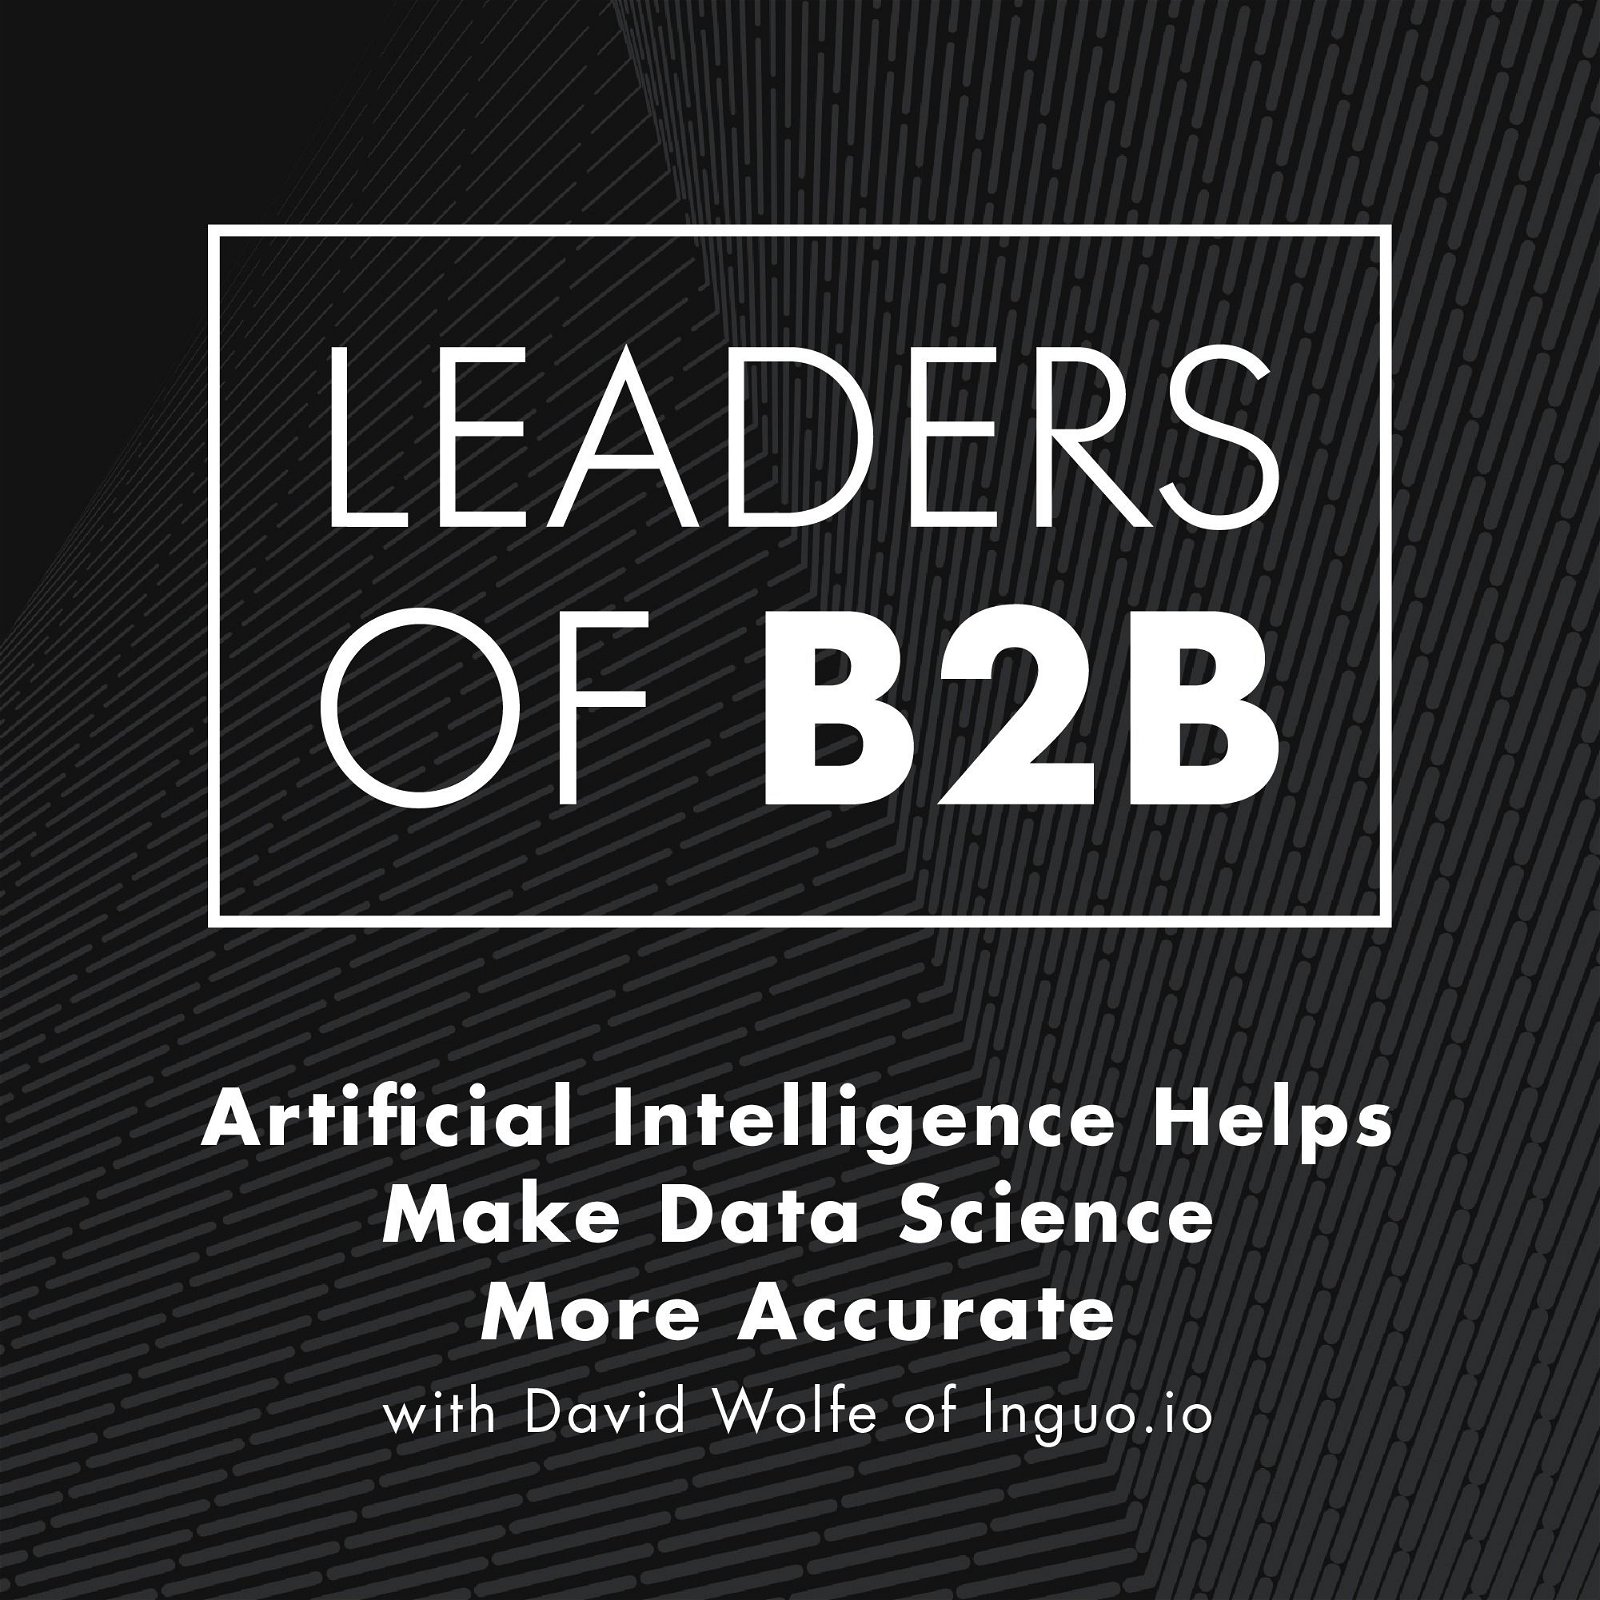 Artificial Intelligence Helps Make Data Science More Accurate with David Wolfe of Inguo.io